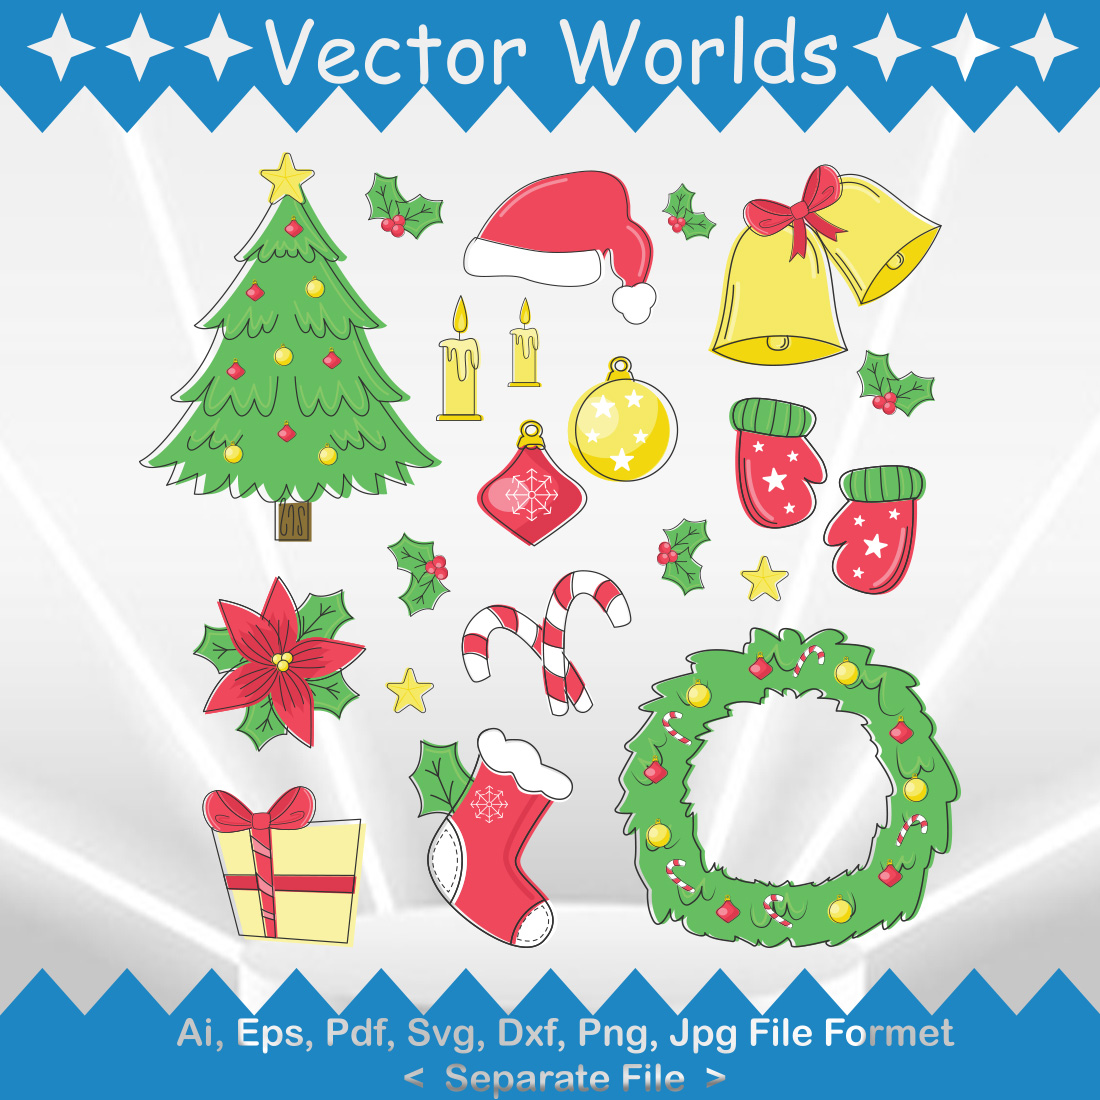 ORTHODOX CHRISTMAS SVG Vector Design cover image.